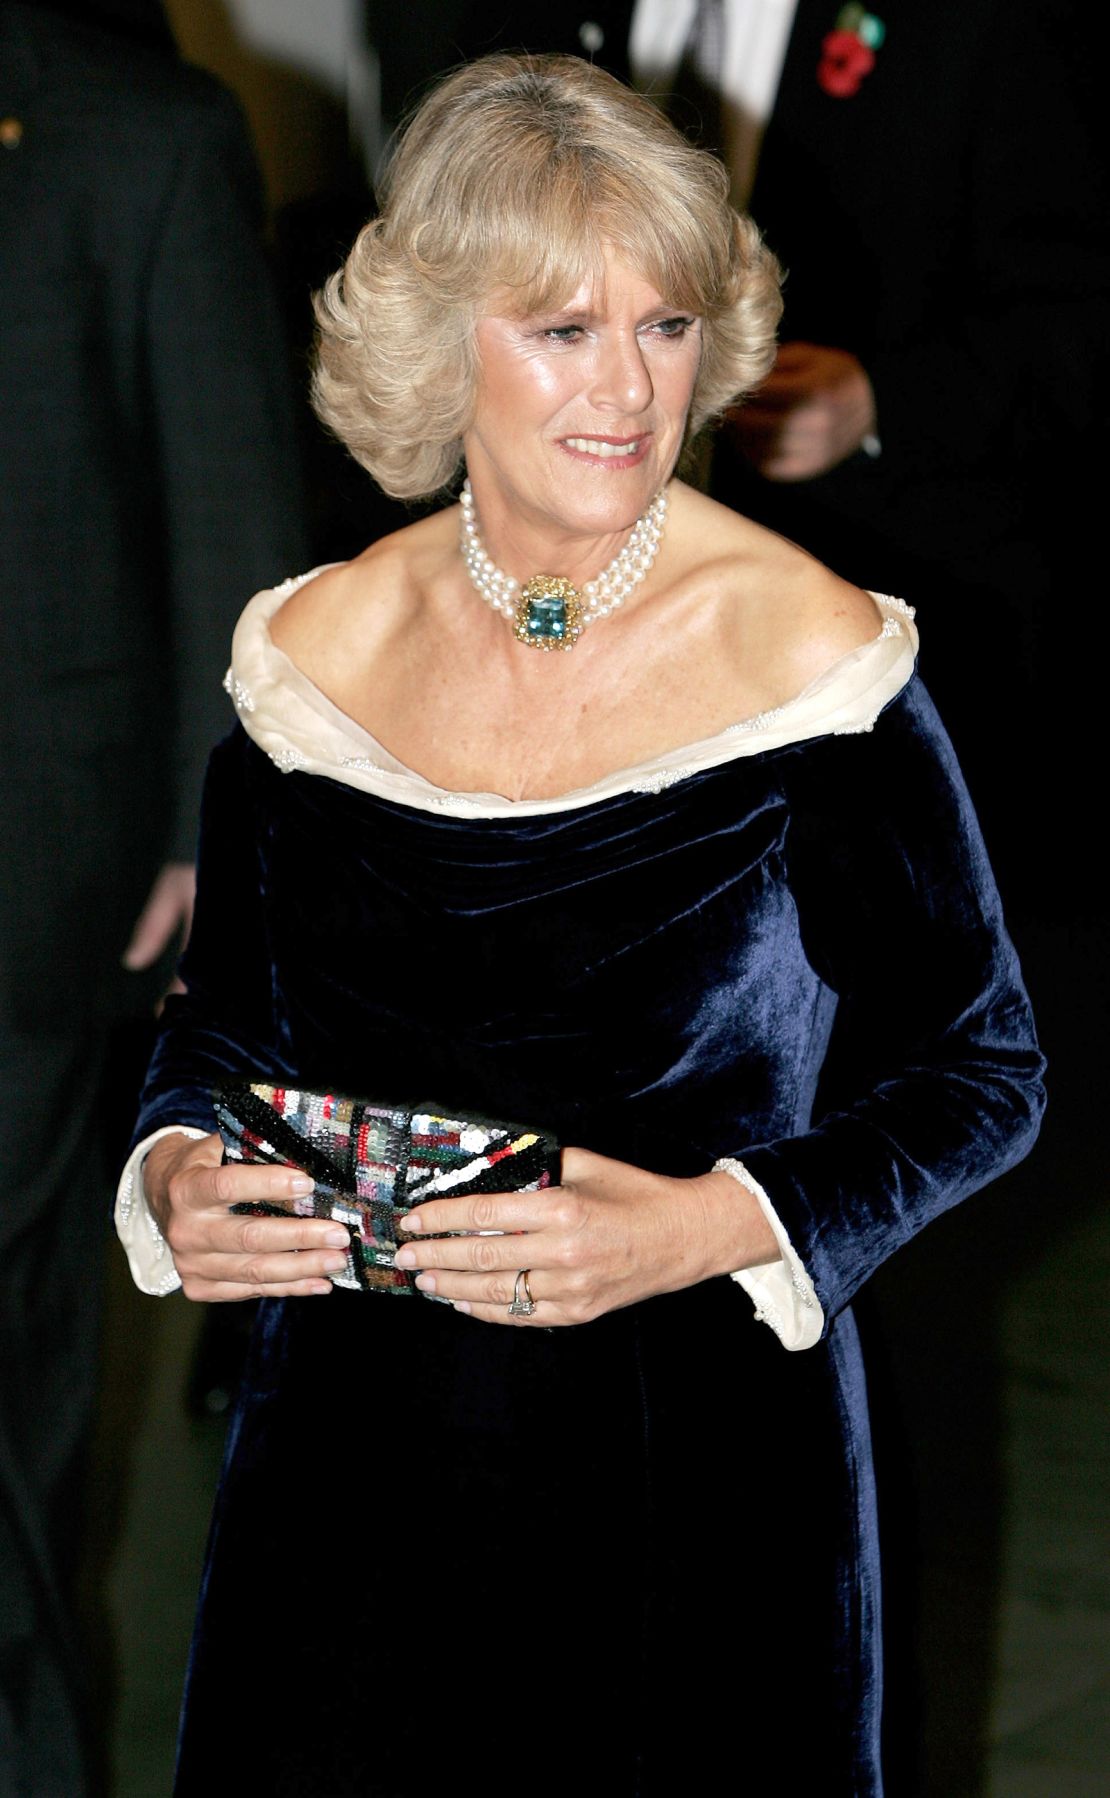 Velvet quickly became a favorite fabric for Camilla, shown here in a deep navy off-the-shoulder gown she wore to a gala at the Museum of Modern Art in New York in 2005. Her aquamarine and pearl choker is another staple.